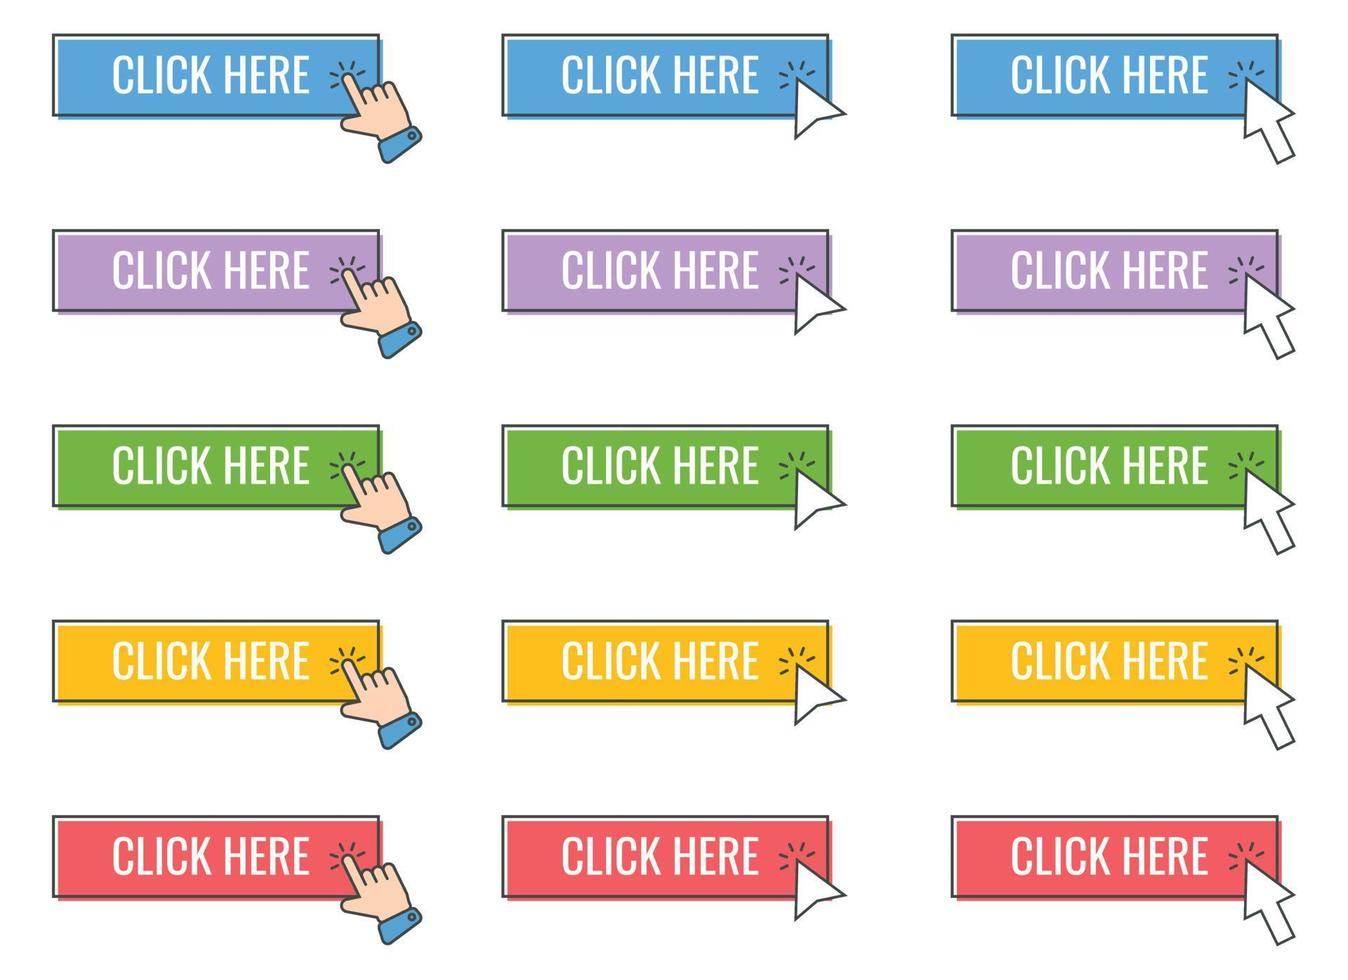 Click cursor icon with click here button vector set. Action button with mouse click